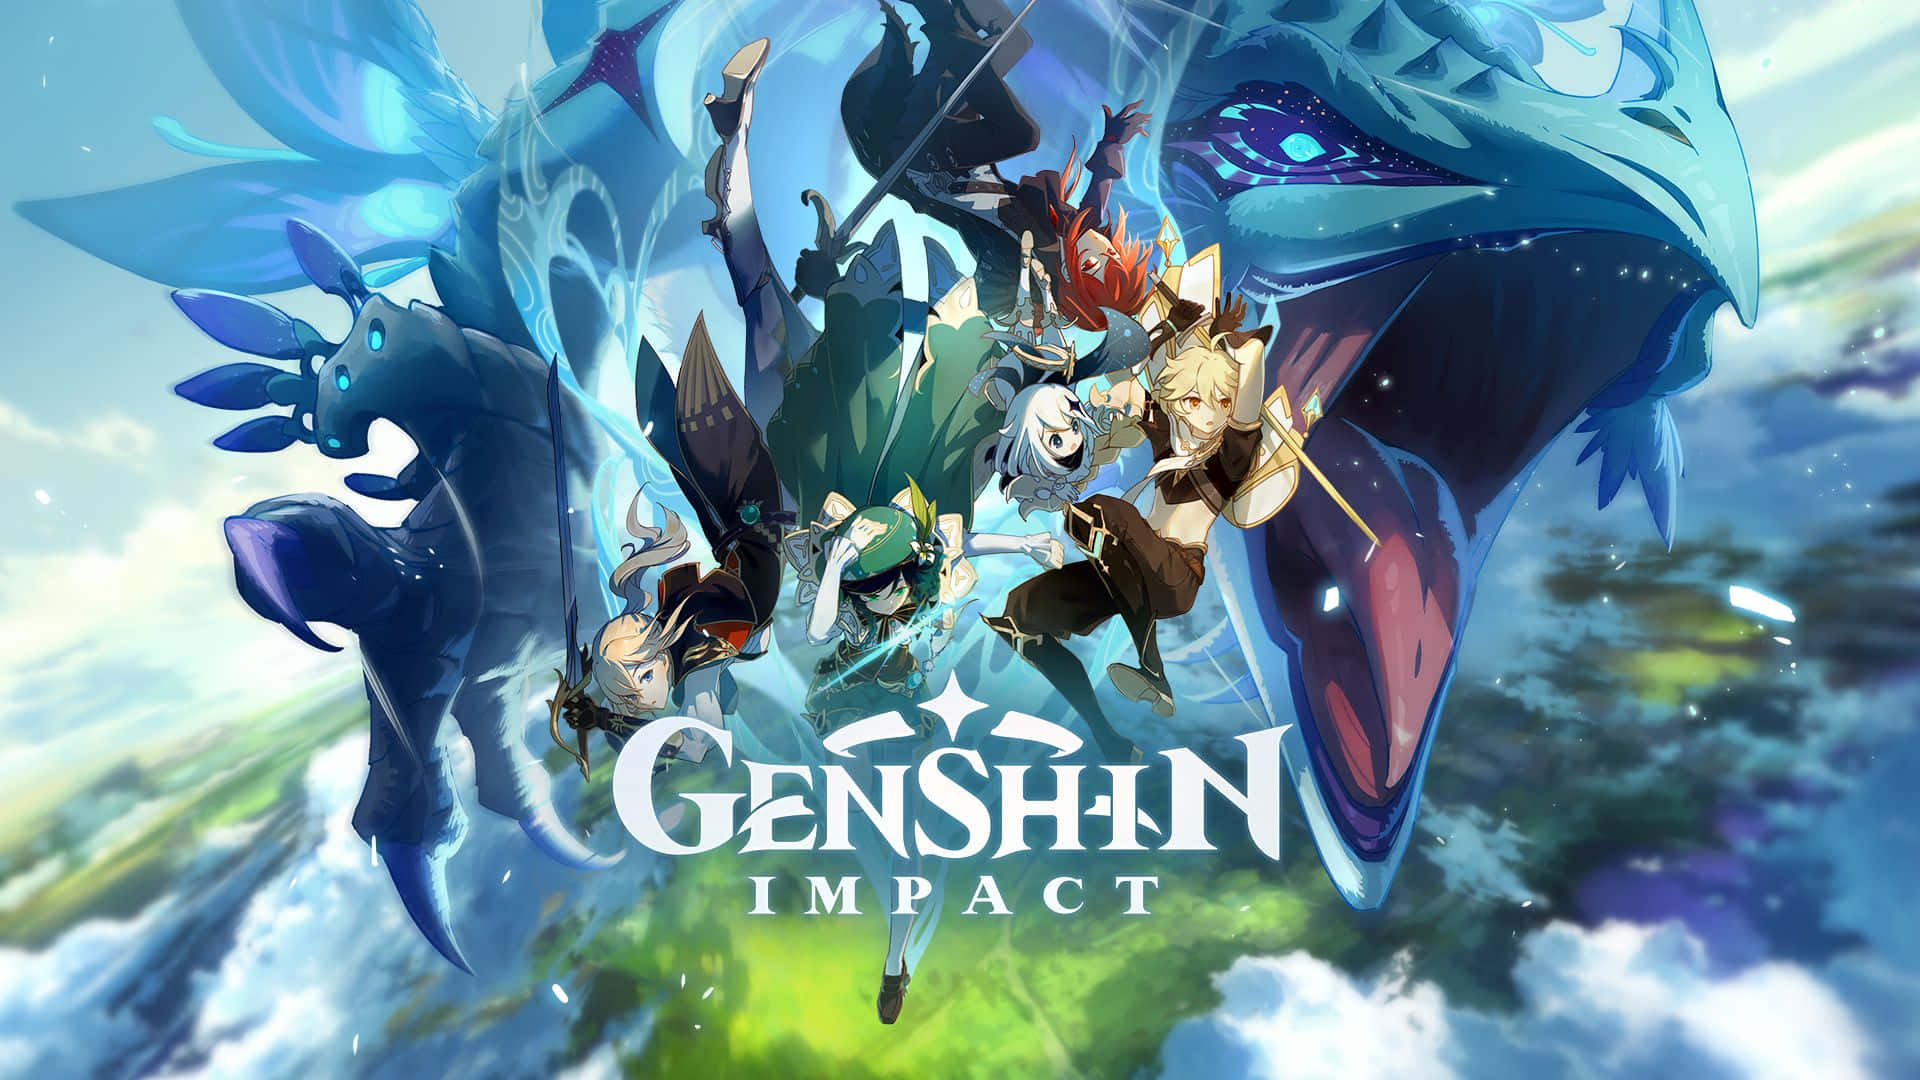 "Dive into the world of Teyvat in Genshin Impact!"